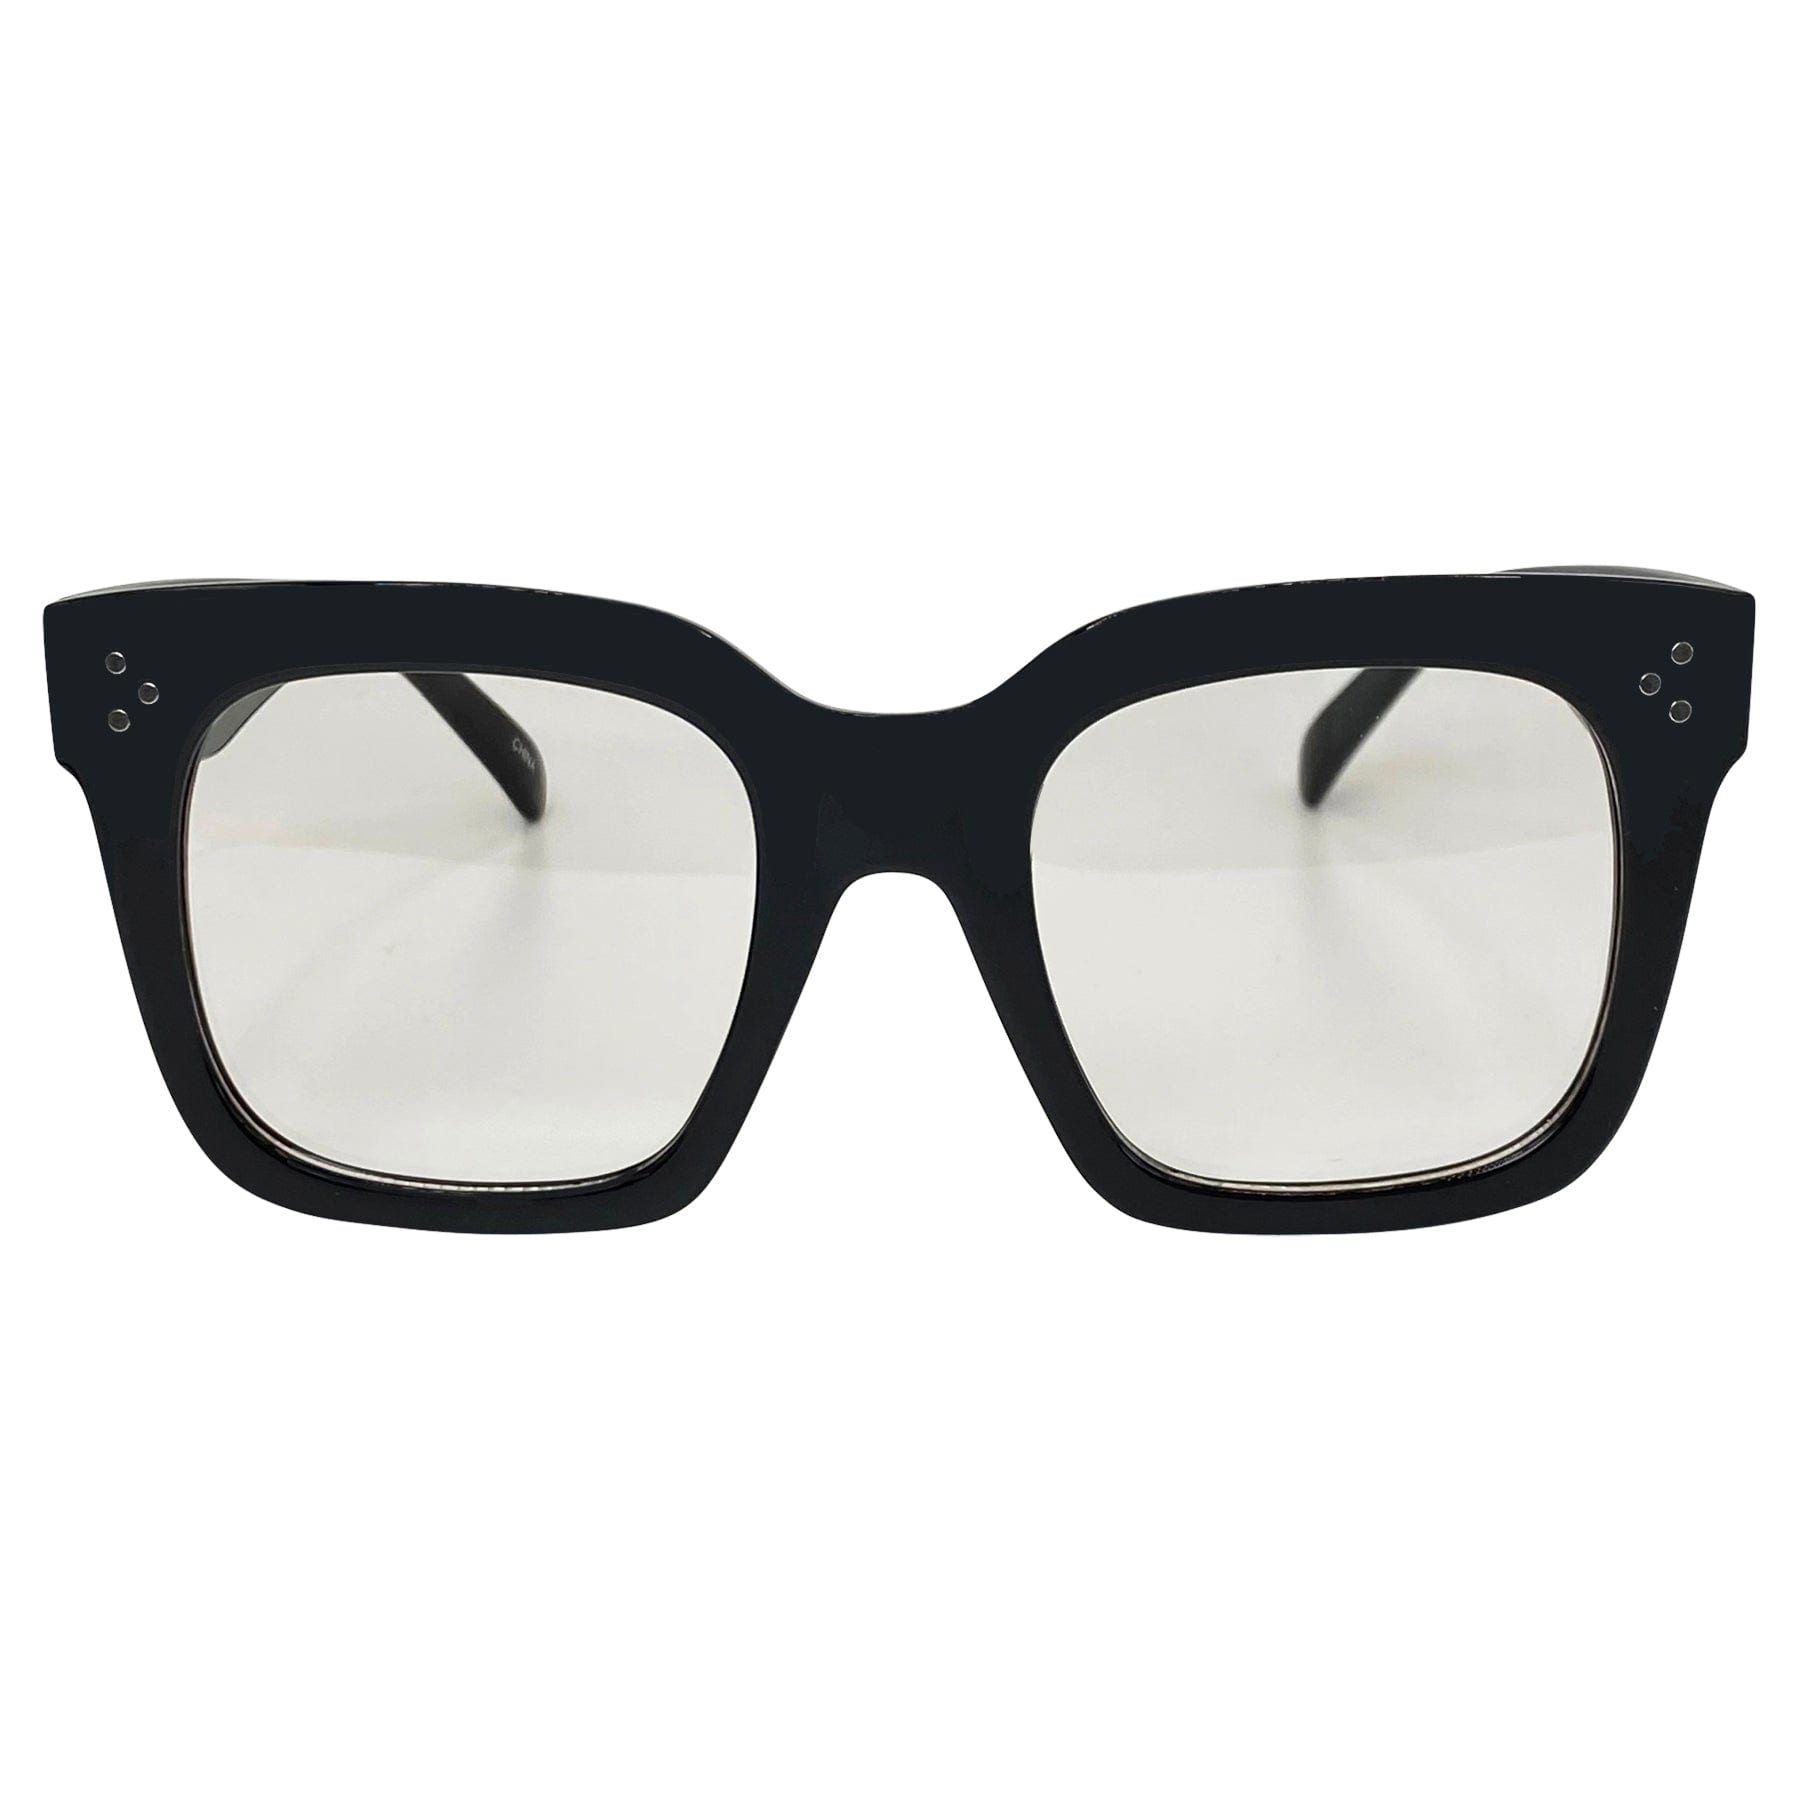 square oversized glasses with a matte black finish and clear lens